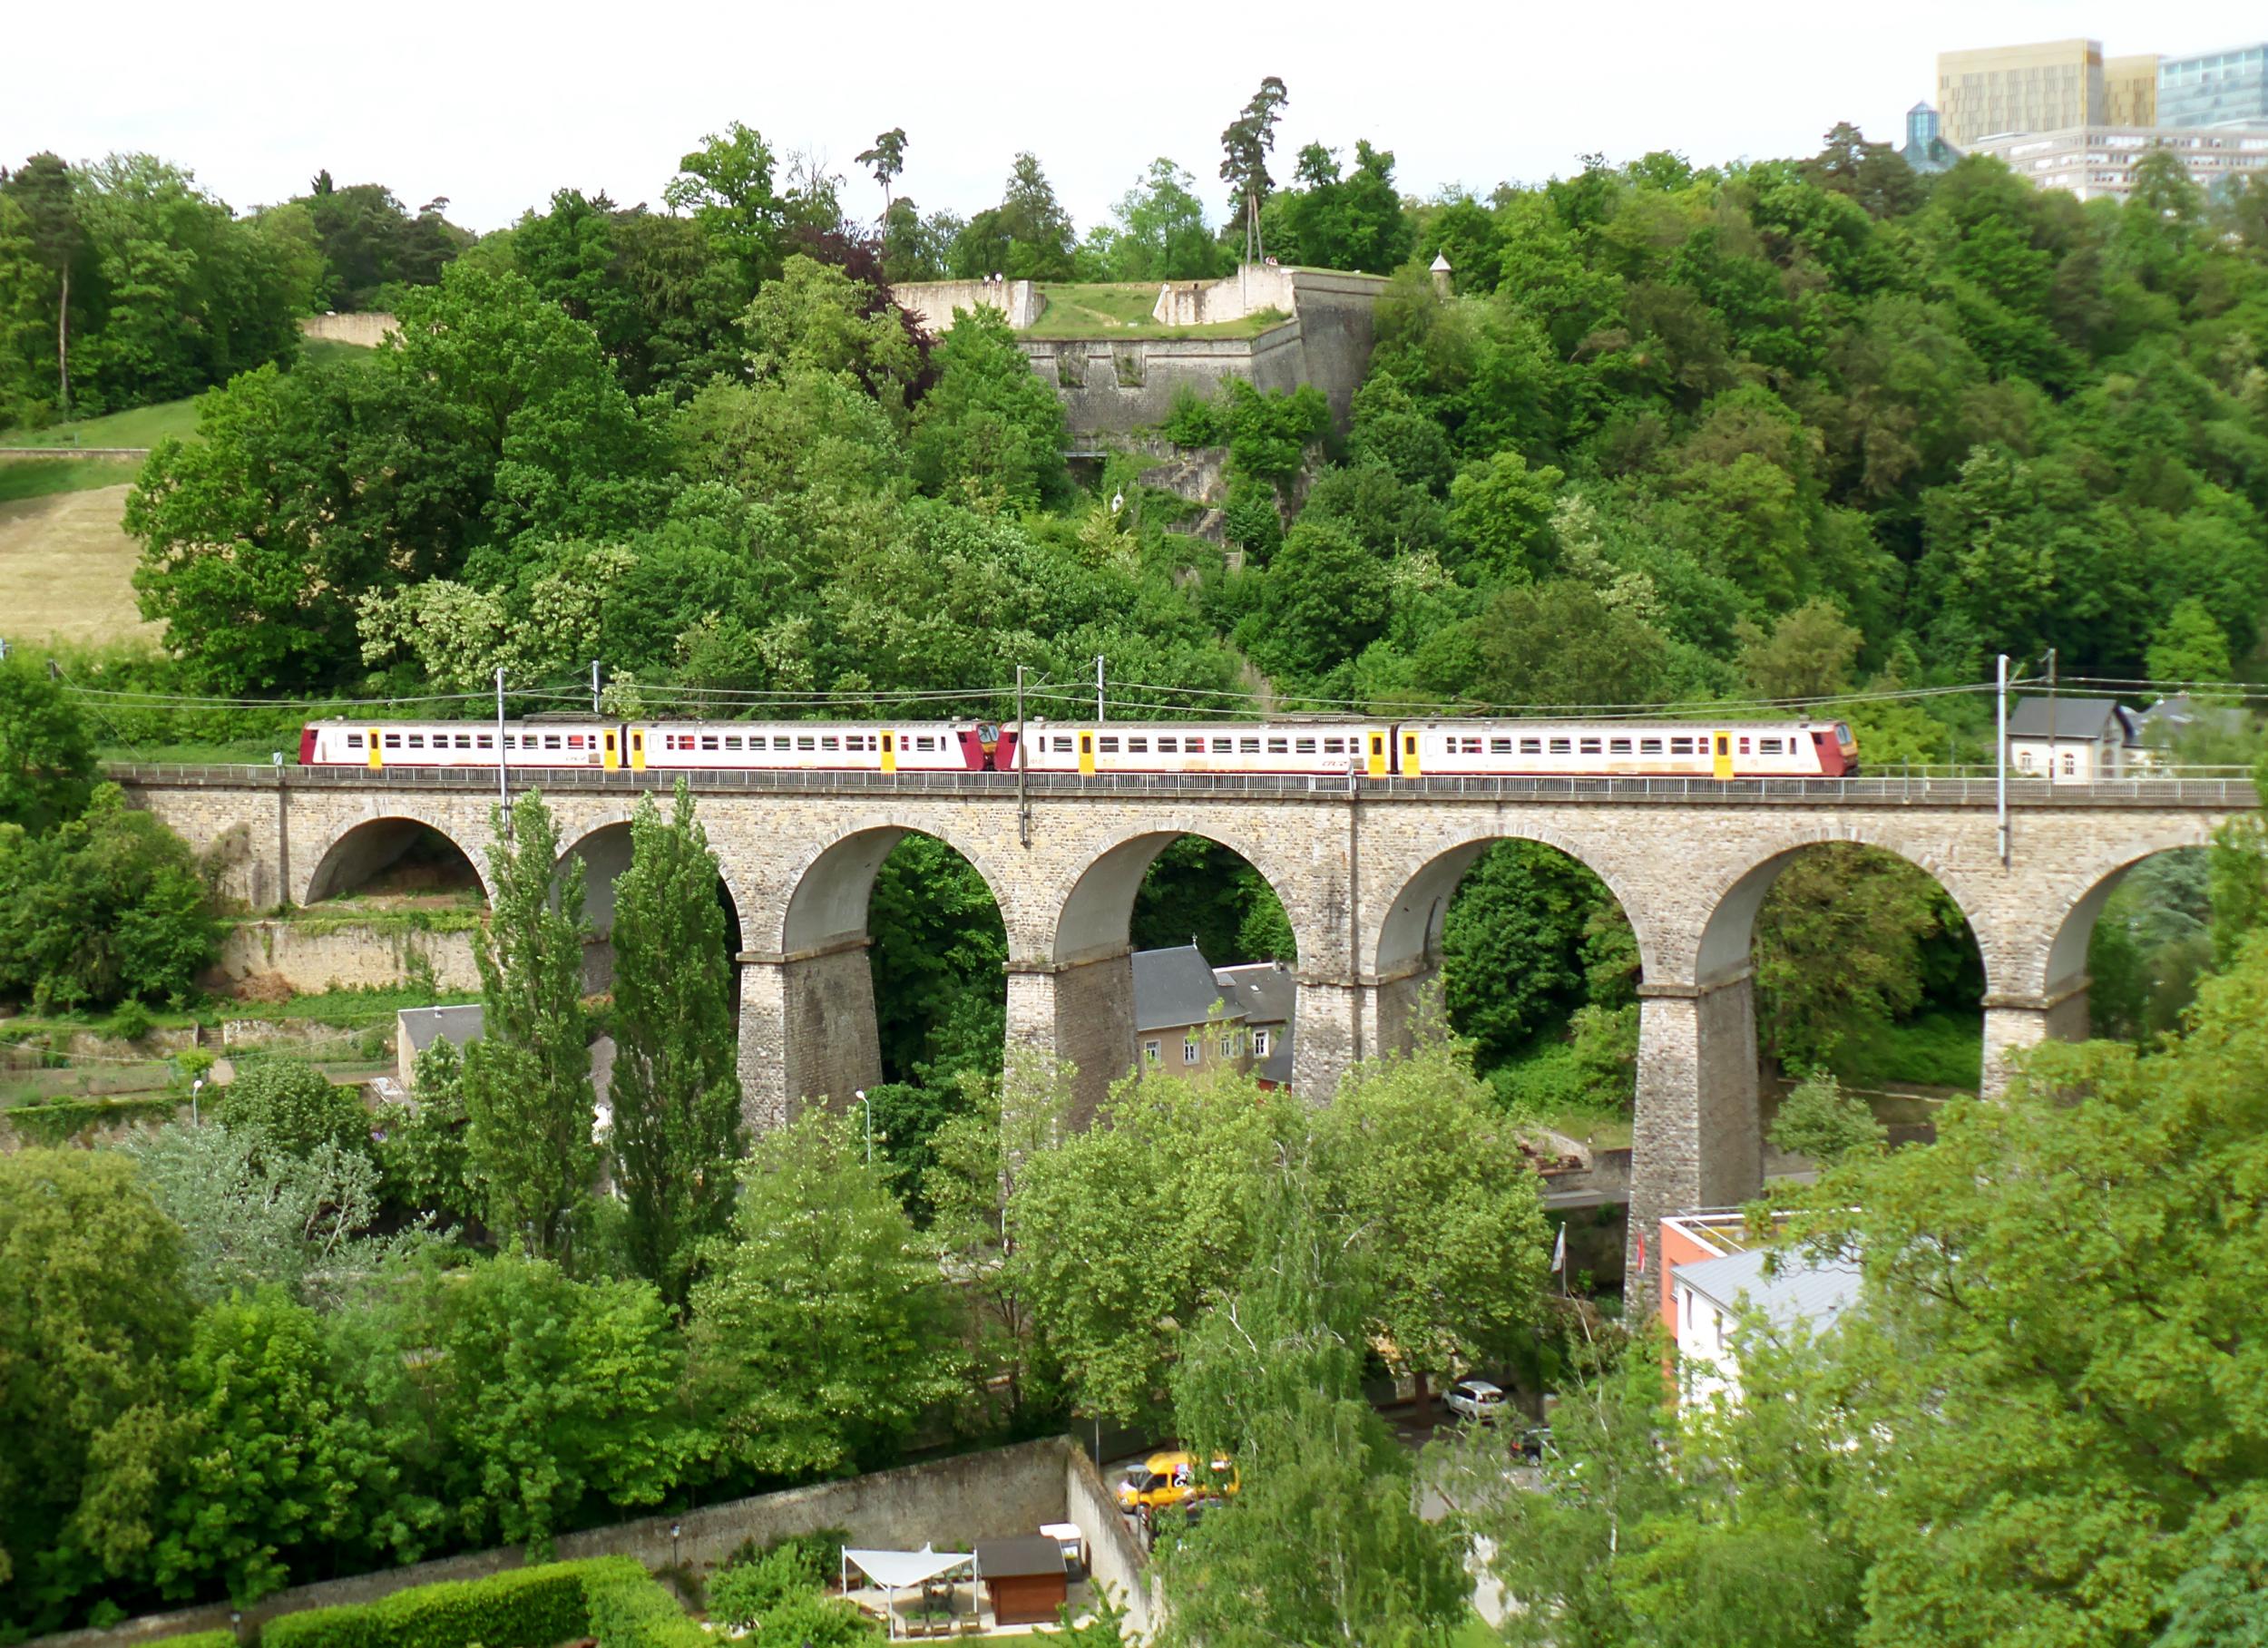 A train crosses a viaduct in Luxembourg City